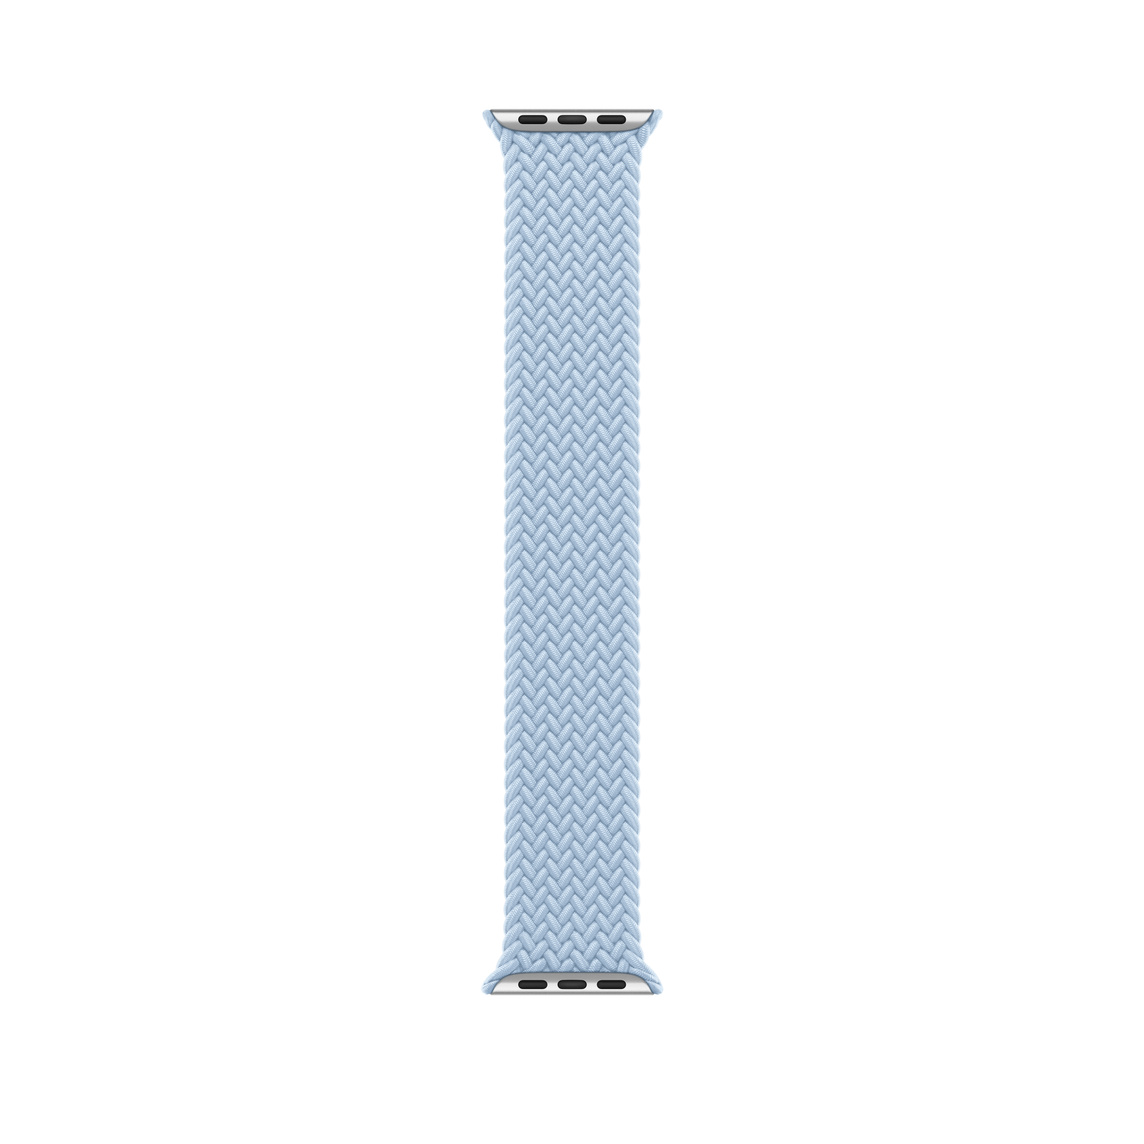 Light Blue Braided Solo Loop band, woven polyester and silicone threads with no clasps or buckles